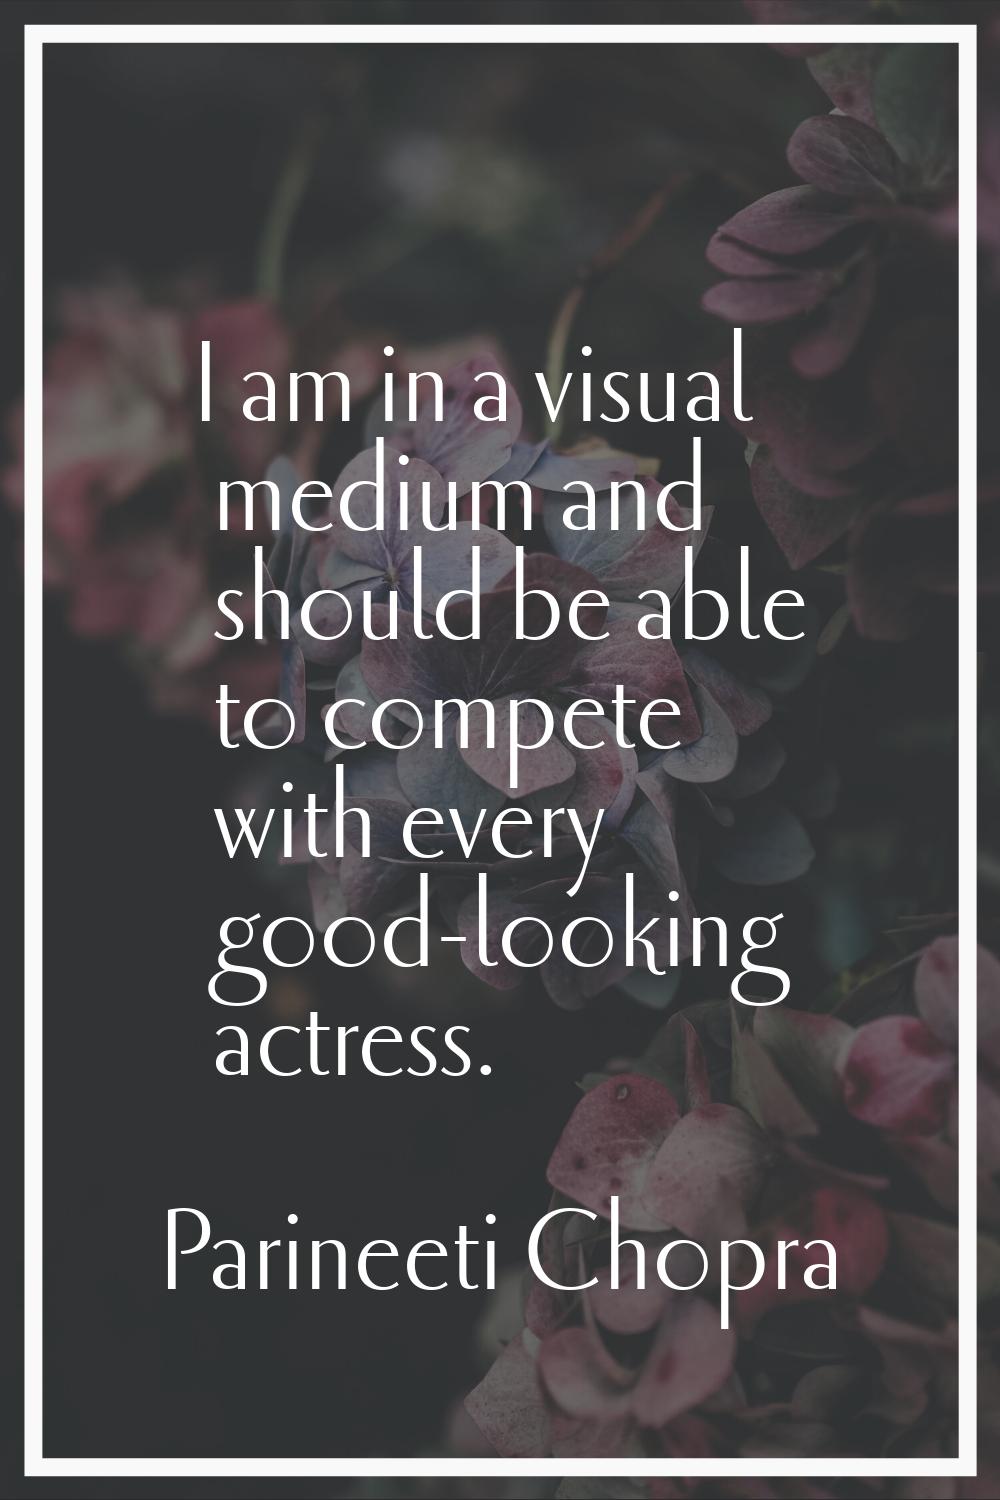 I am in a visual medium and should be able to compete with every good-looking actress.